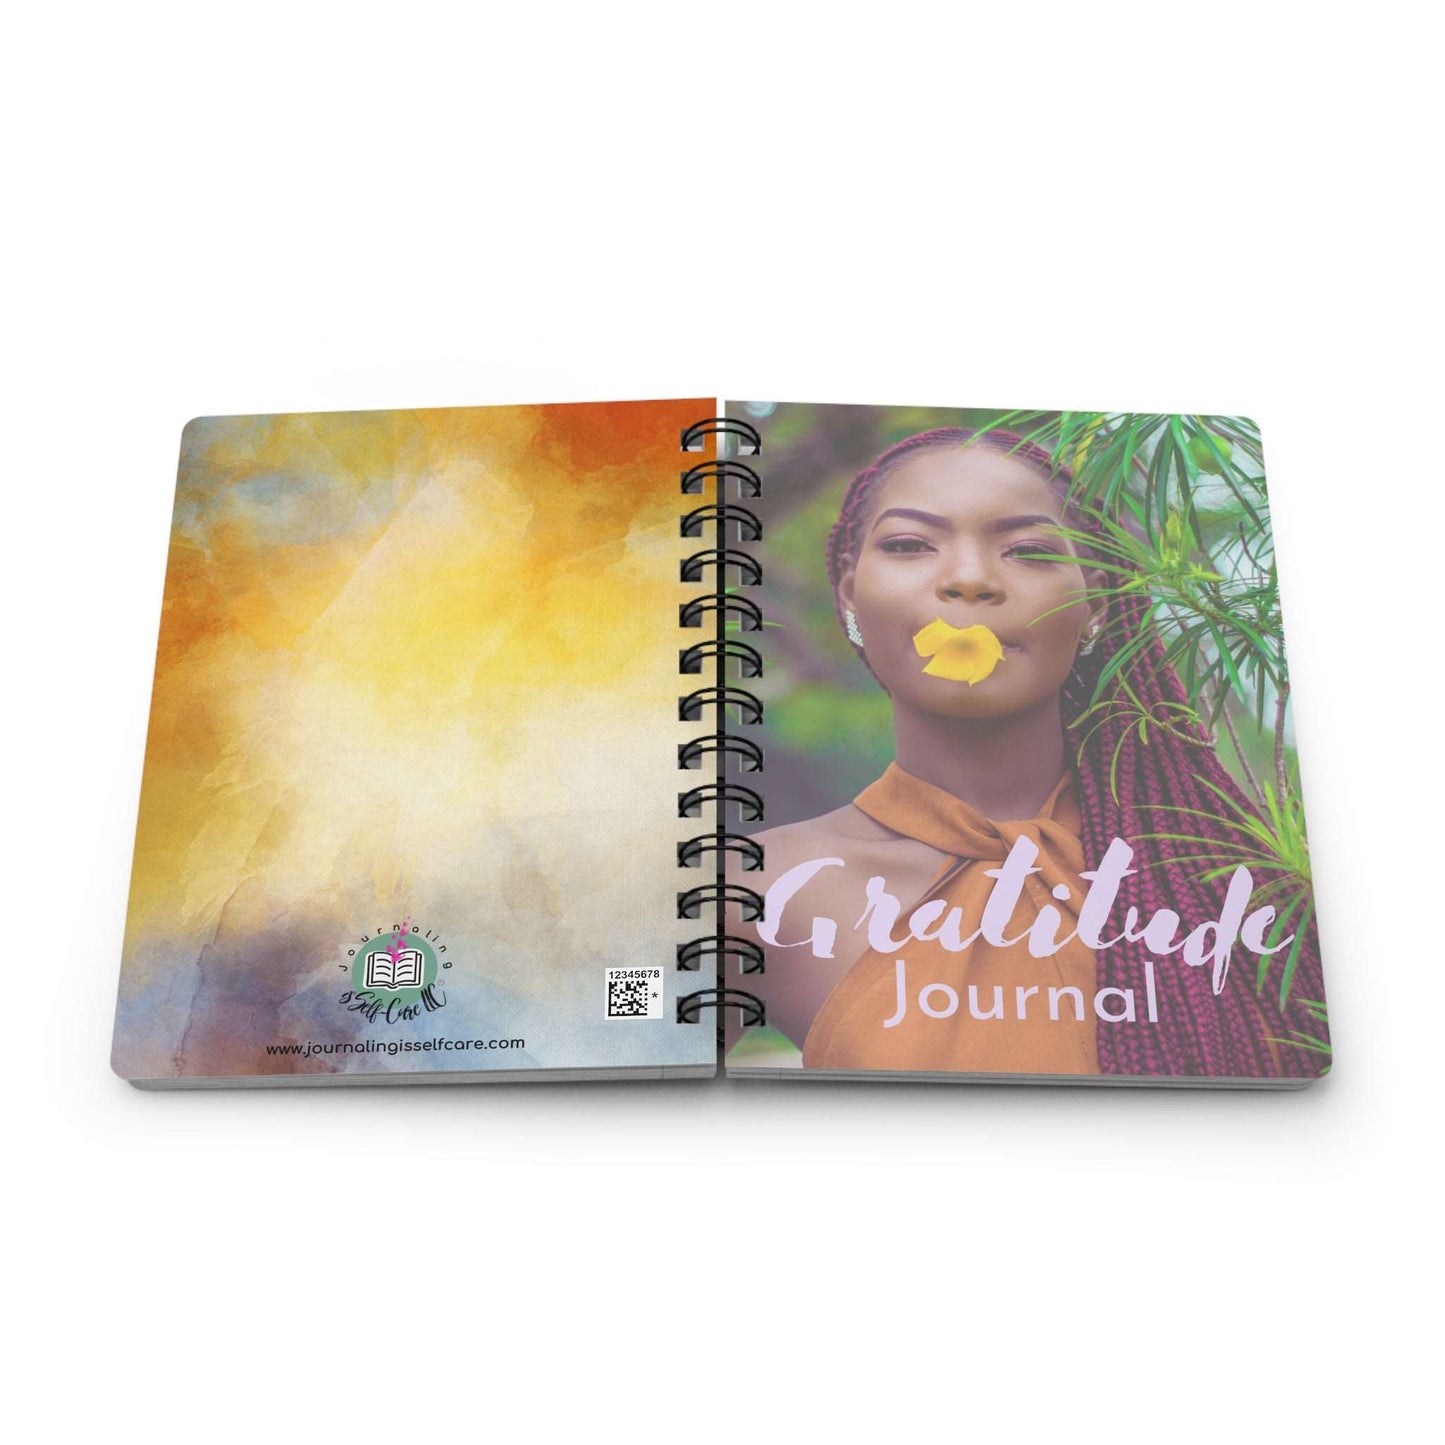 This Gratitude Journal : A Journal For Women is designed to help you express your gratitude and cultivate a positive mindset. With daily prompts and space to write down what you are thankful for, this Gratitude Journal : A Journal For Women serves as a powerful tool.